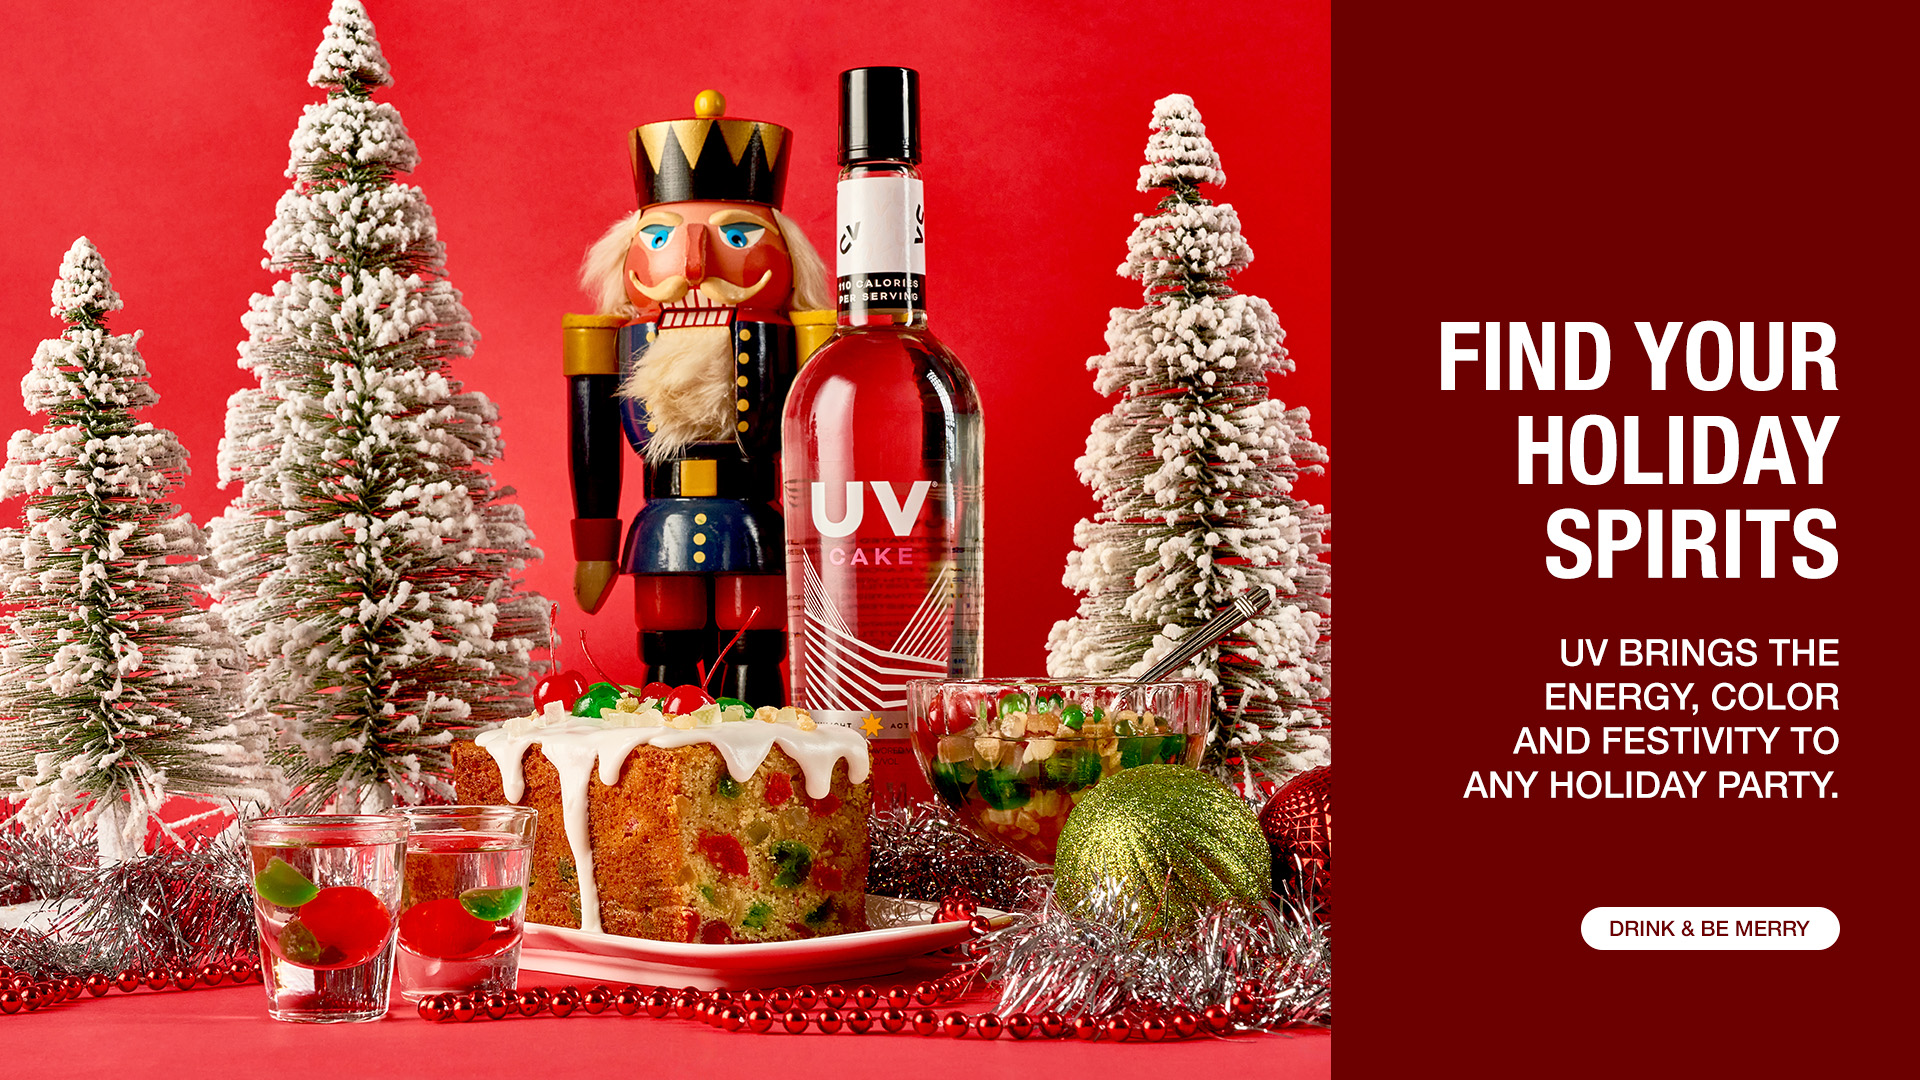 A bottle of UV cake with a fruit cake, nutcracker, and frosted Christmas tree